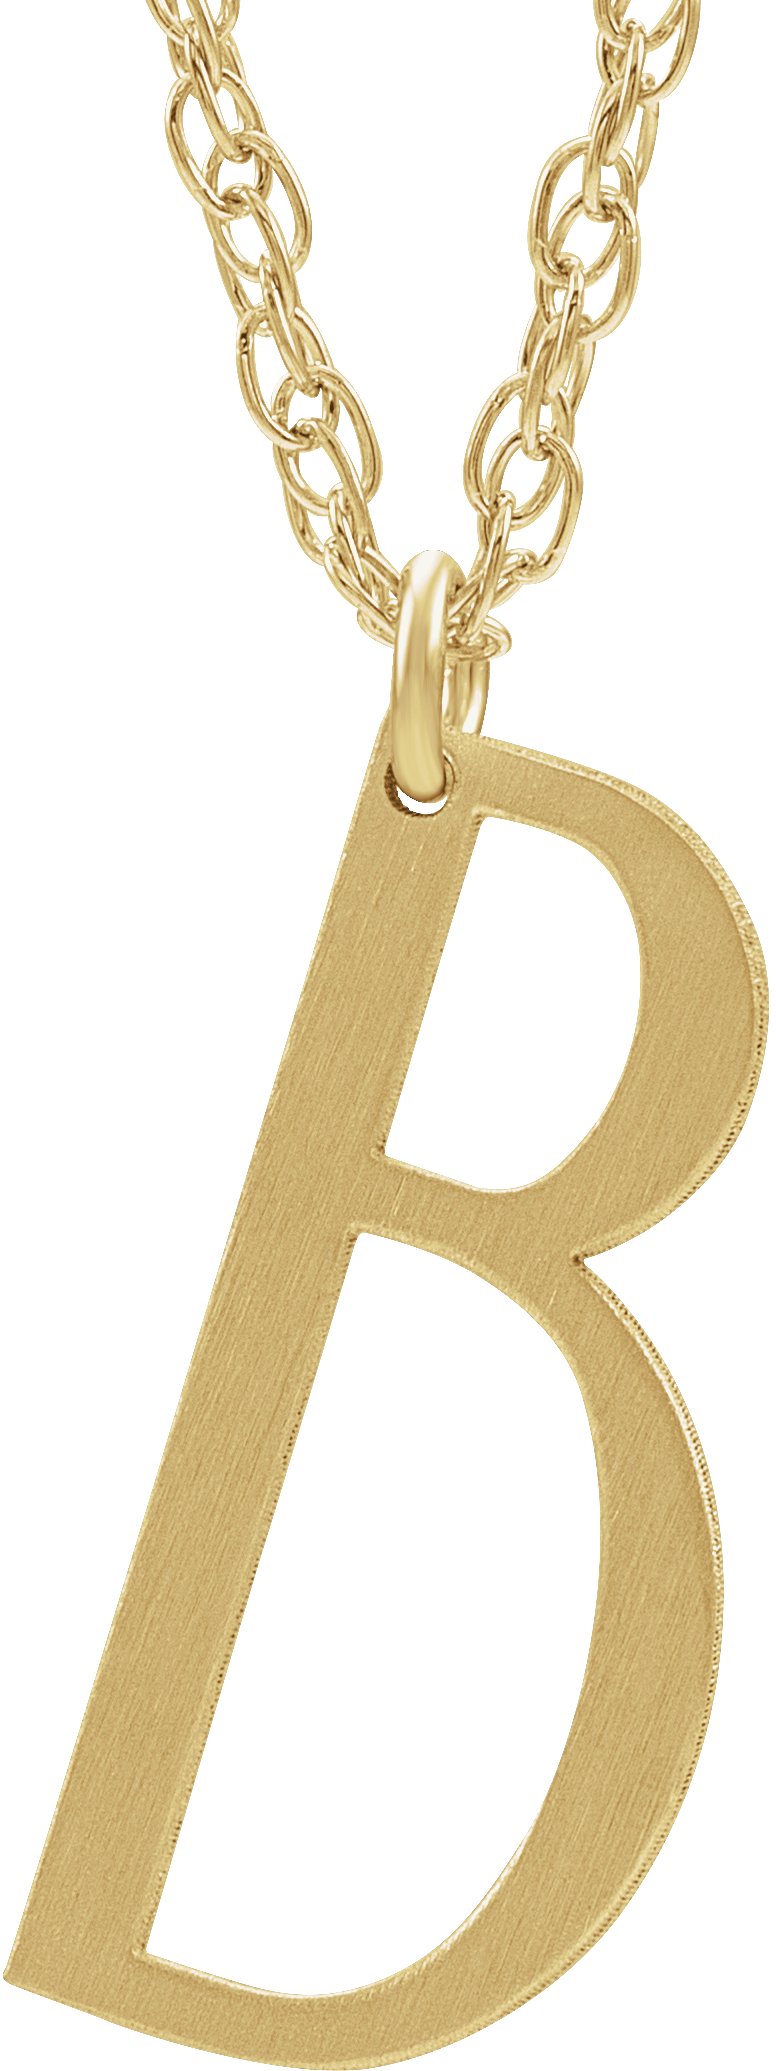 14K Yellow Block Initial B 16-18" Necklace with Brush Finish